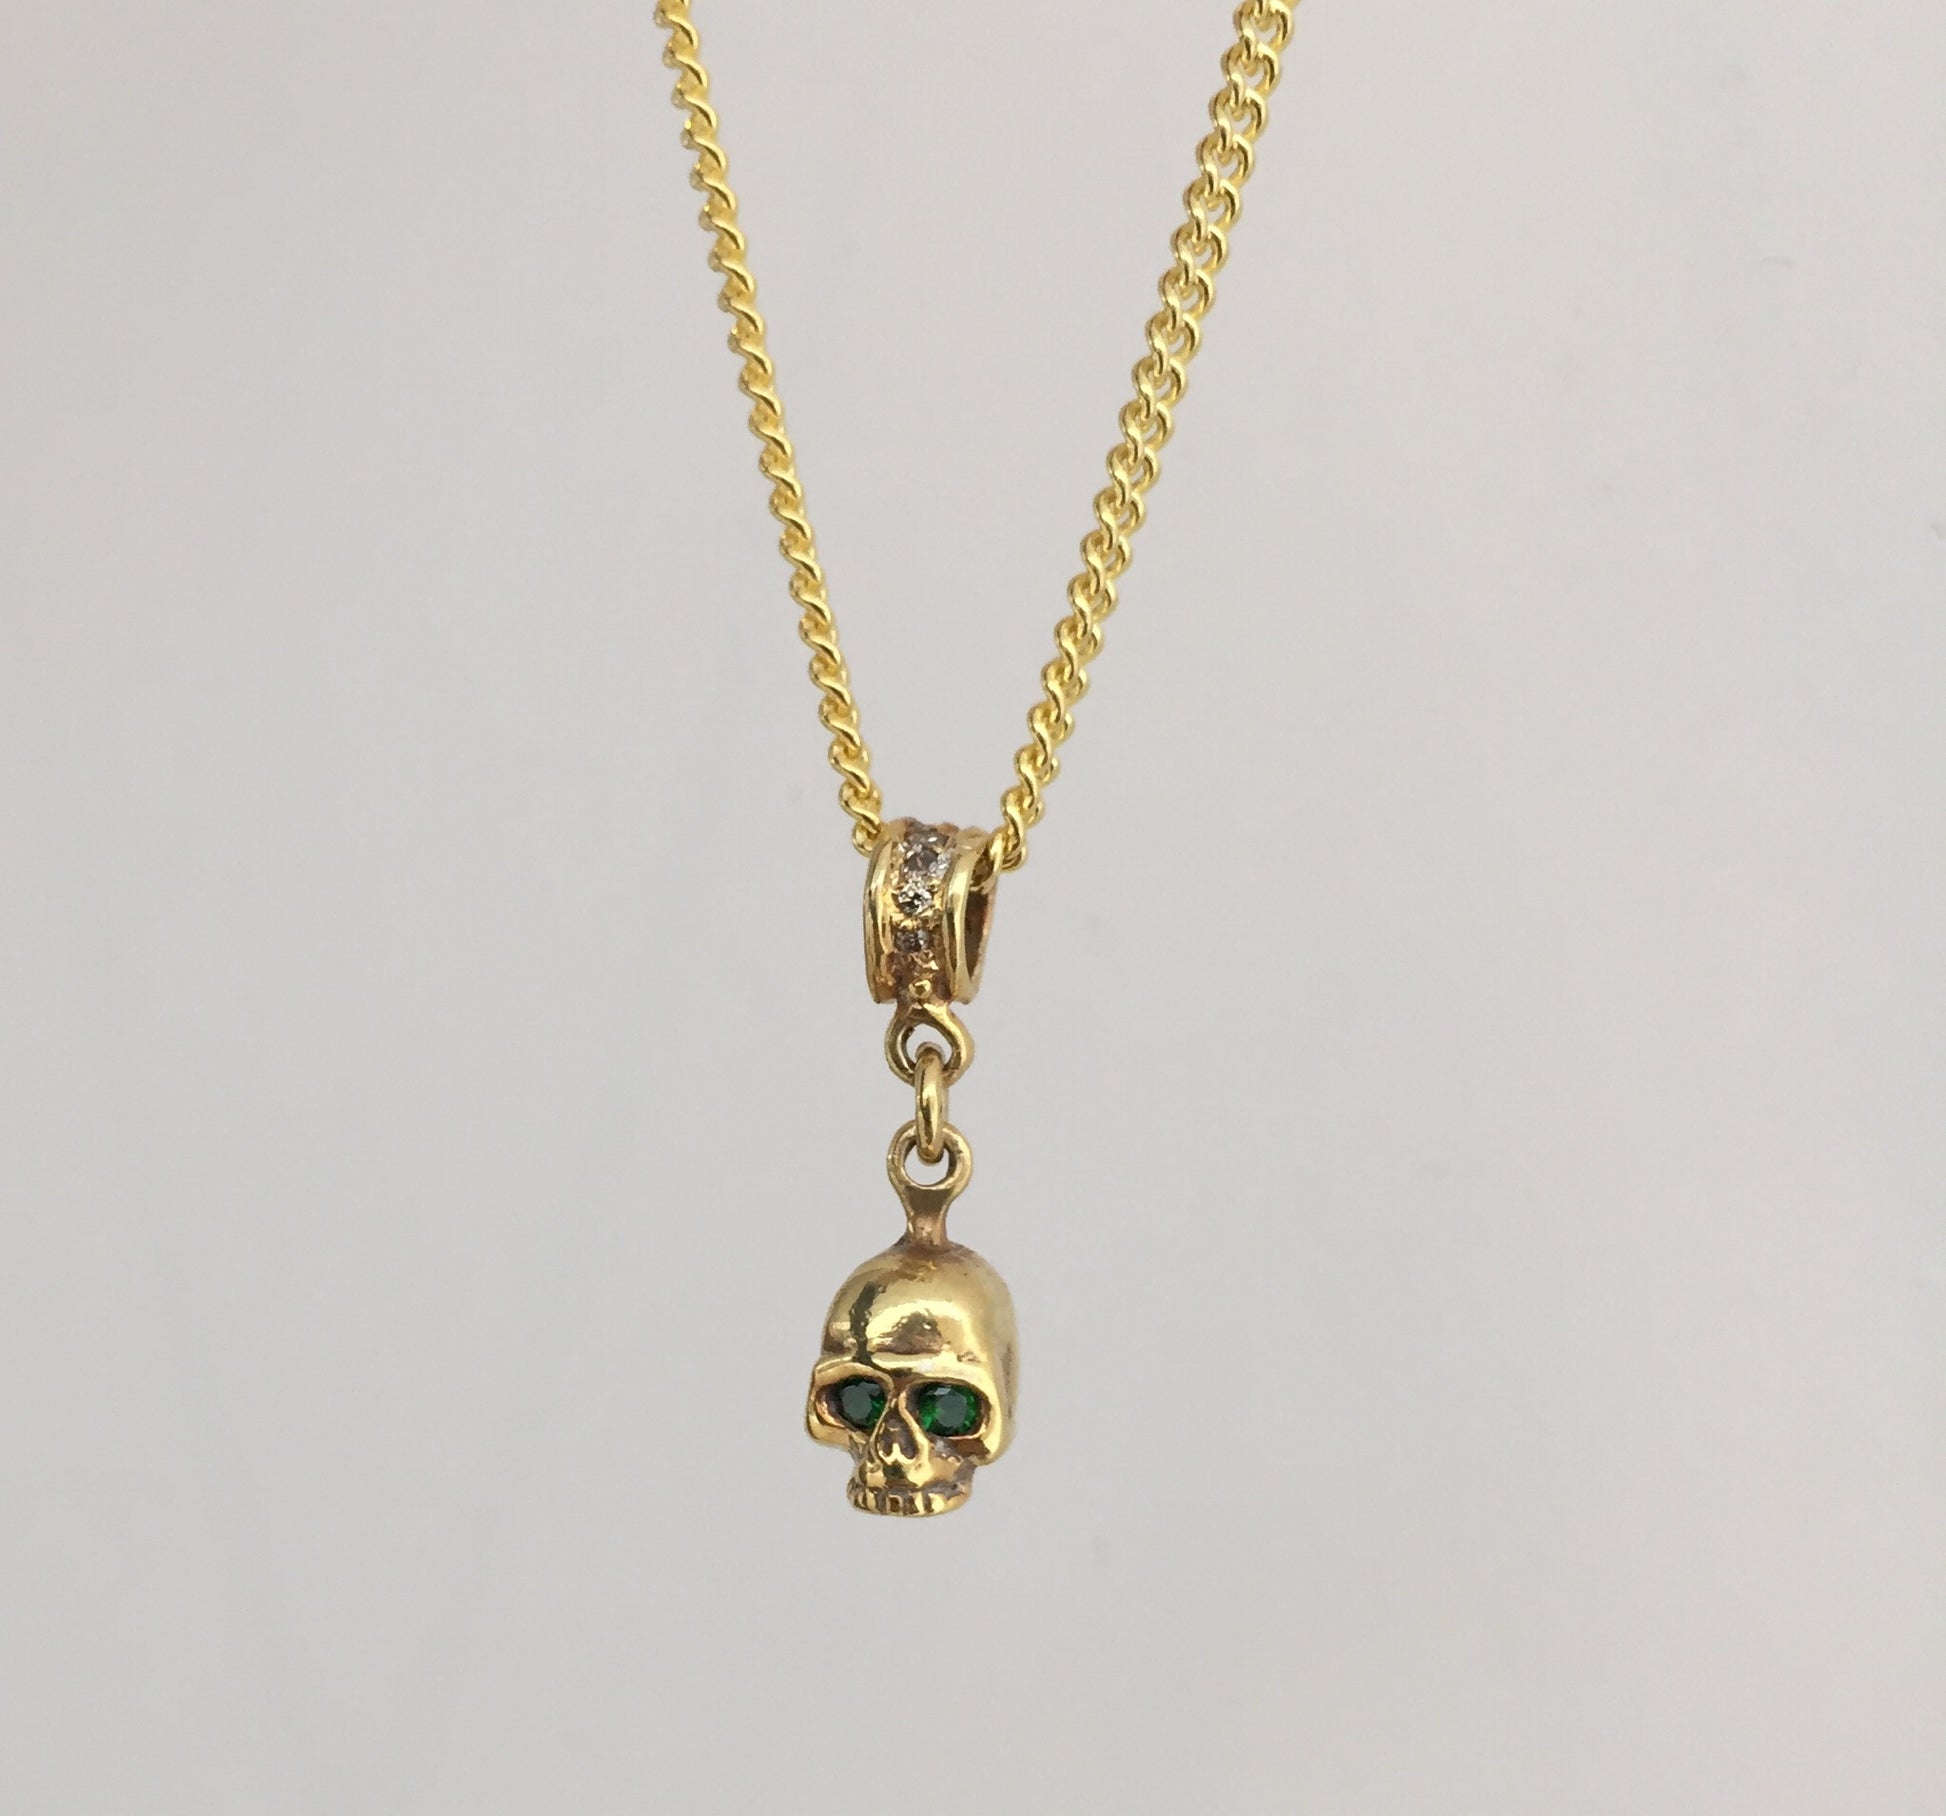 Necklace - Golden Skull with Emeralds and champagne diamonds by RP